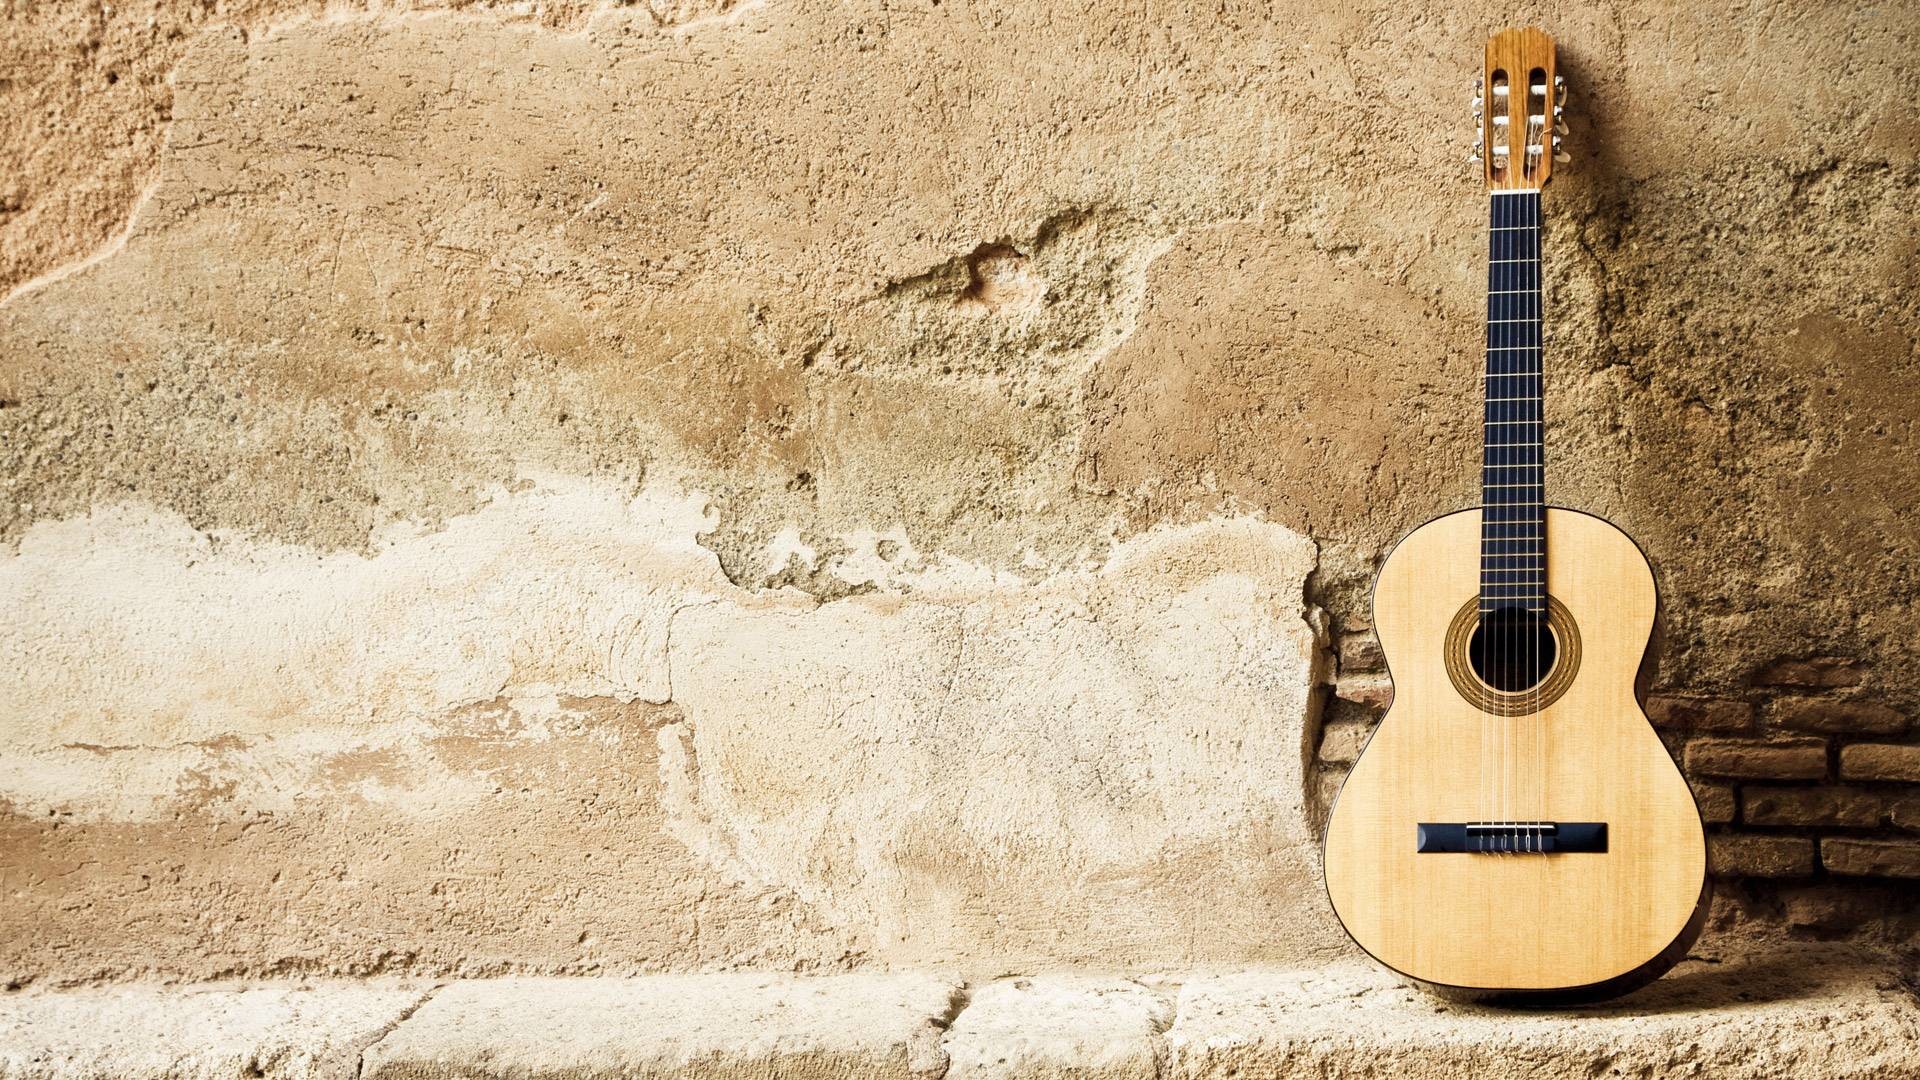 1920x1080 Wallpapers For > Acoustic Guitar Wallpapers For Desktop Hd